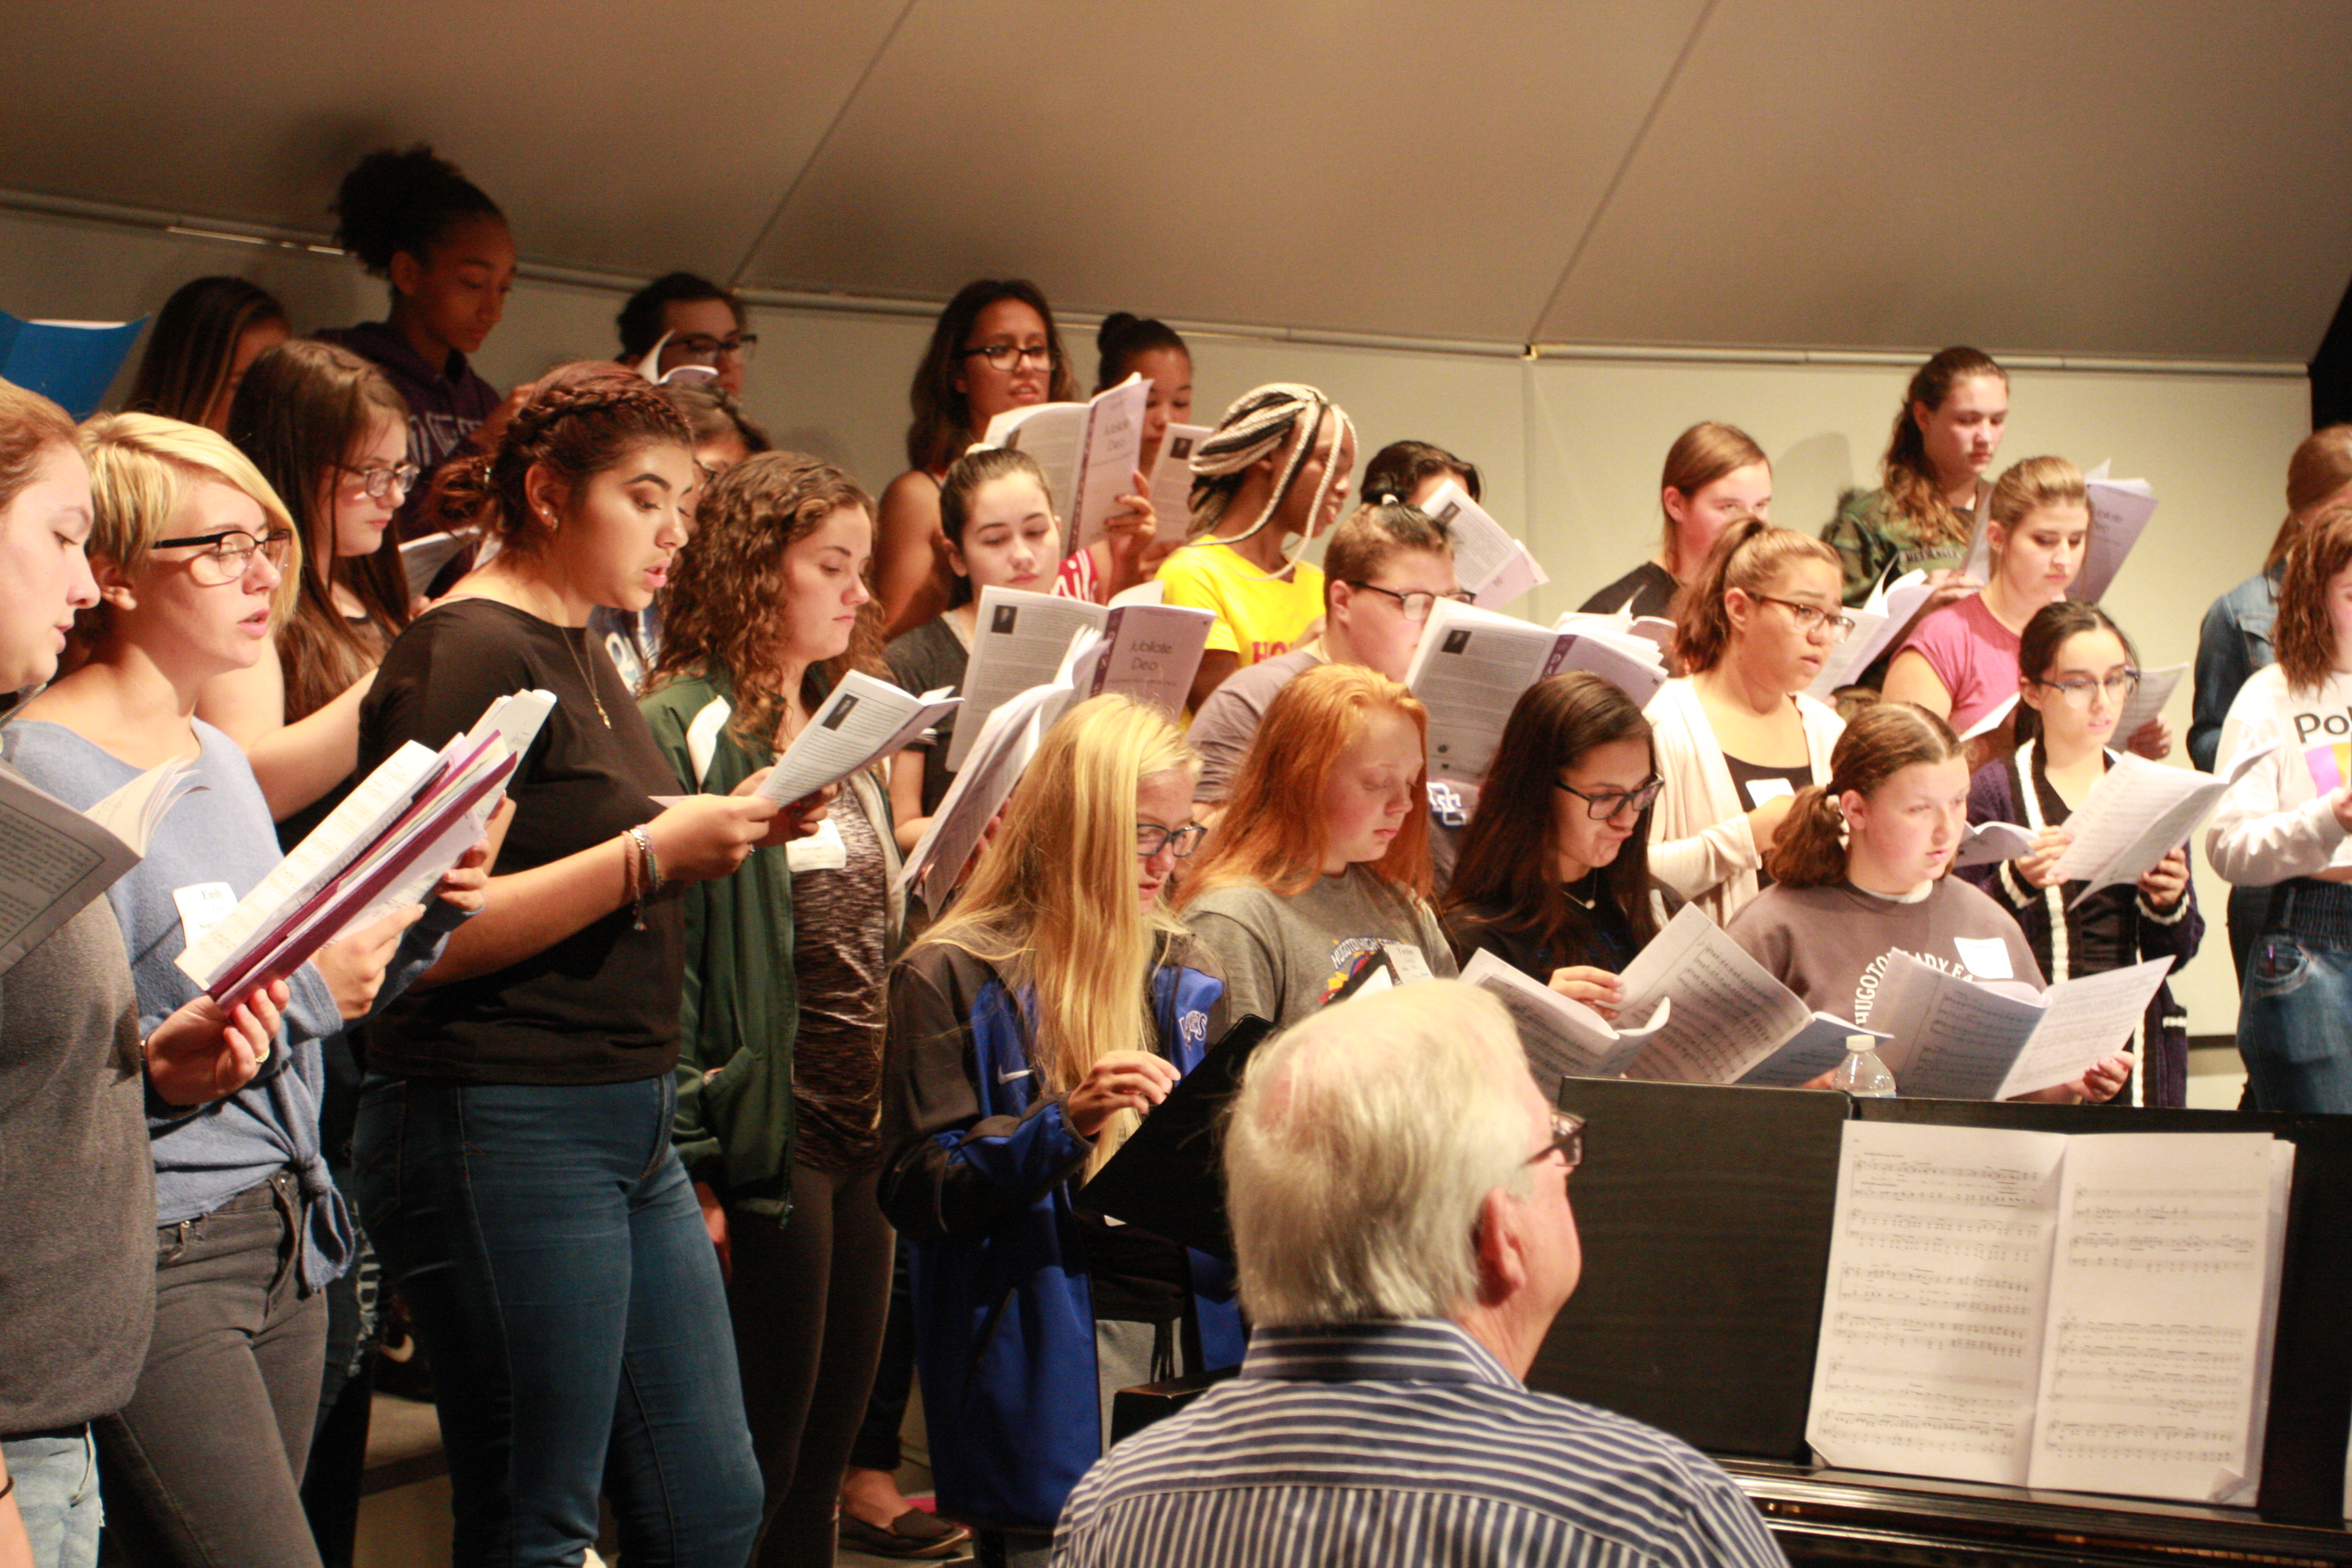 High school singers practicing for the state choir auditions during the workshop